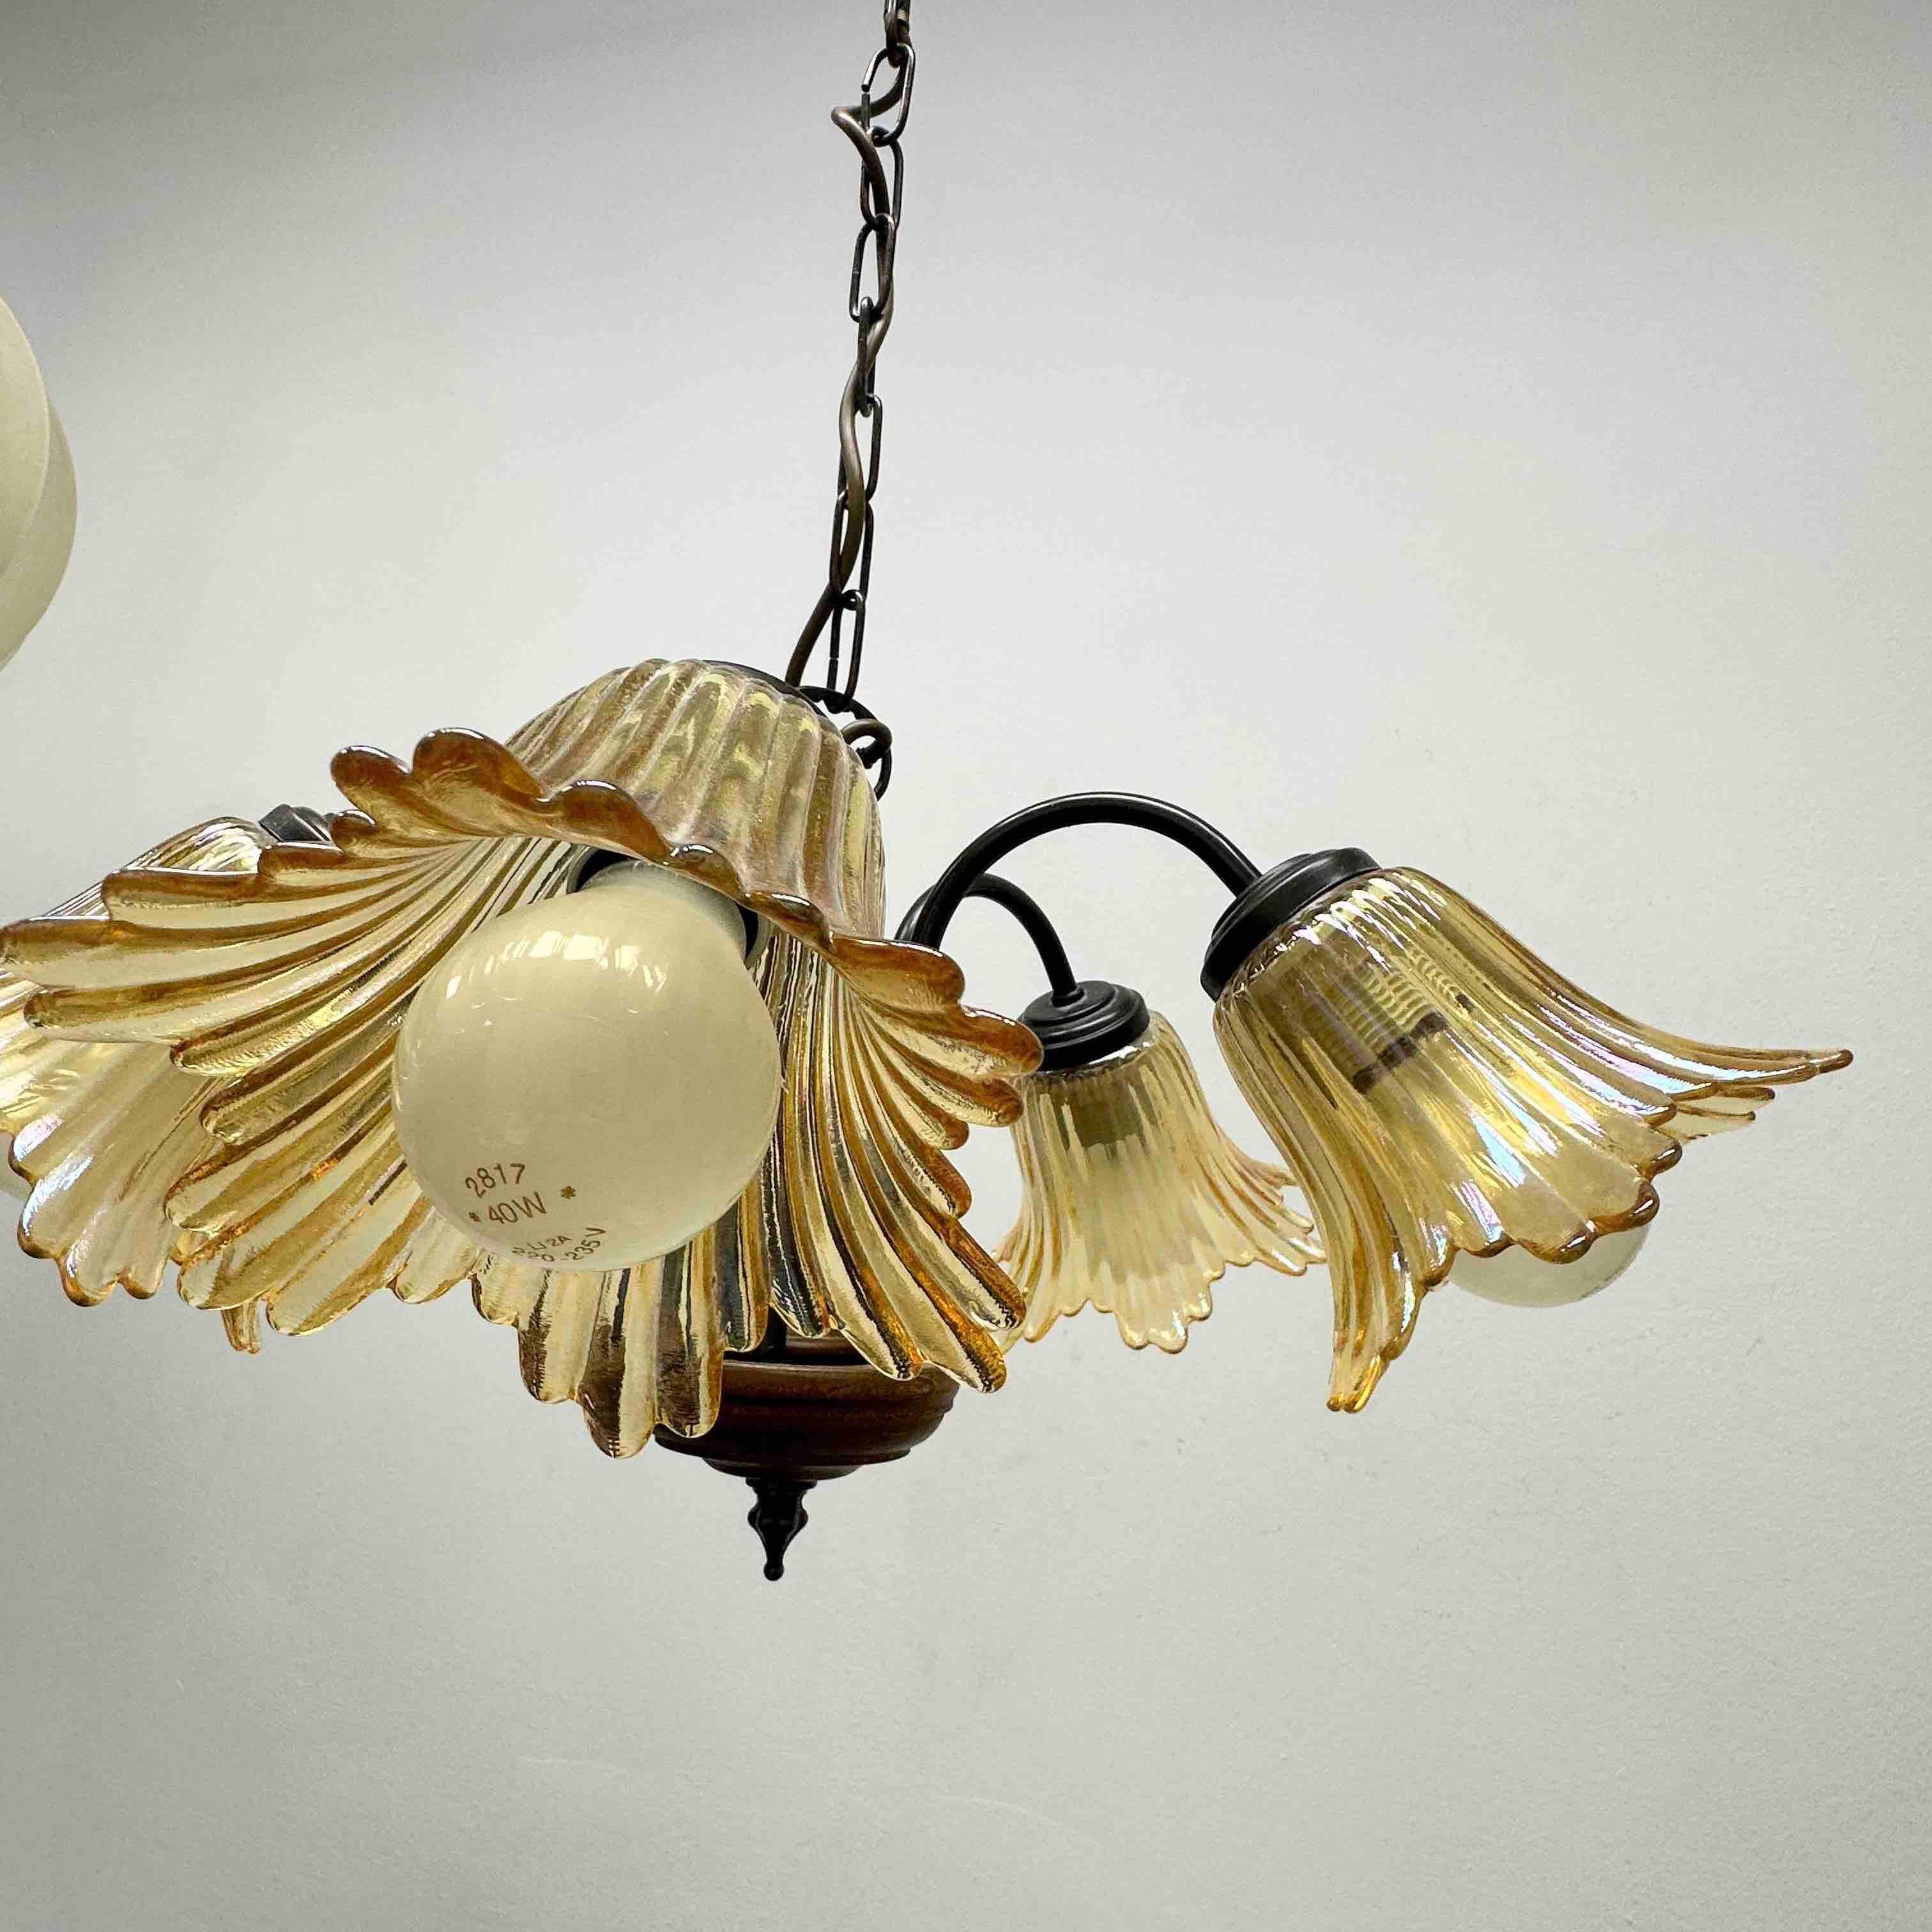 Gorgeous German Tole Wood Metal Glas Shade Five Light Chandelier, 1970s For Sale 4